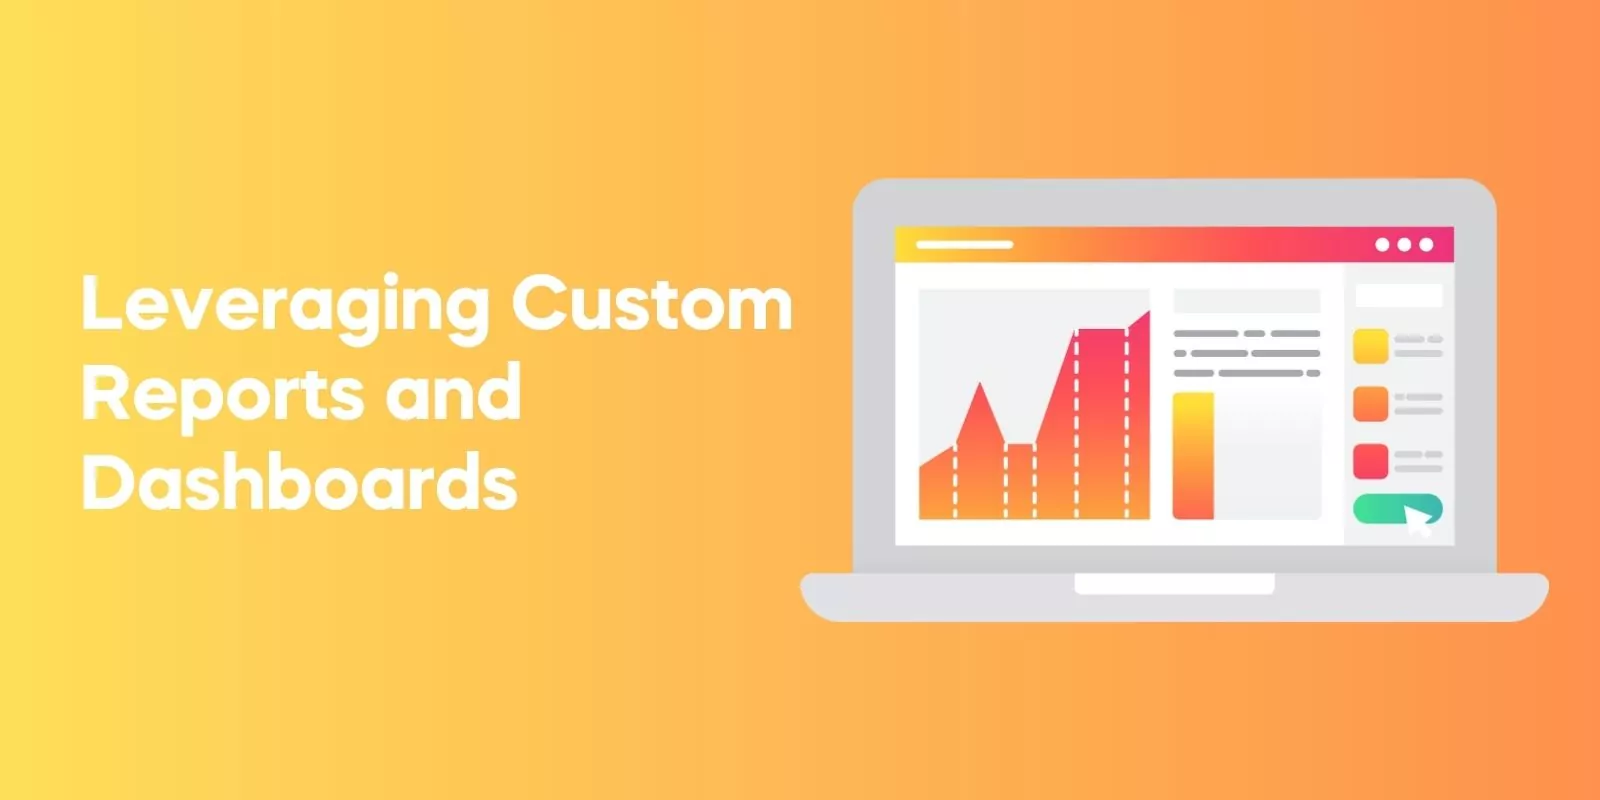 Leveraging Custom Reports and Dashboards